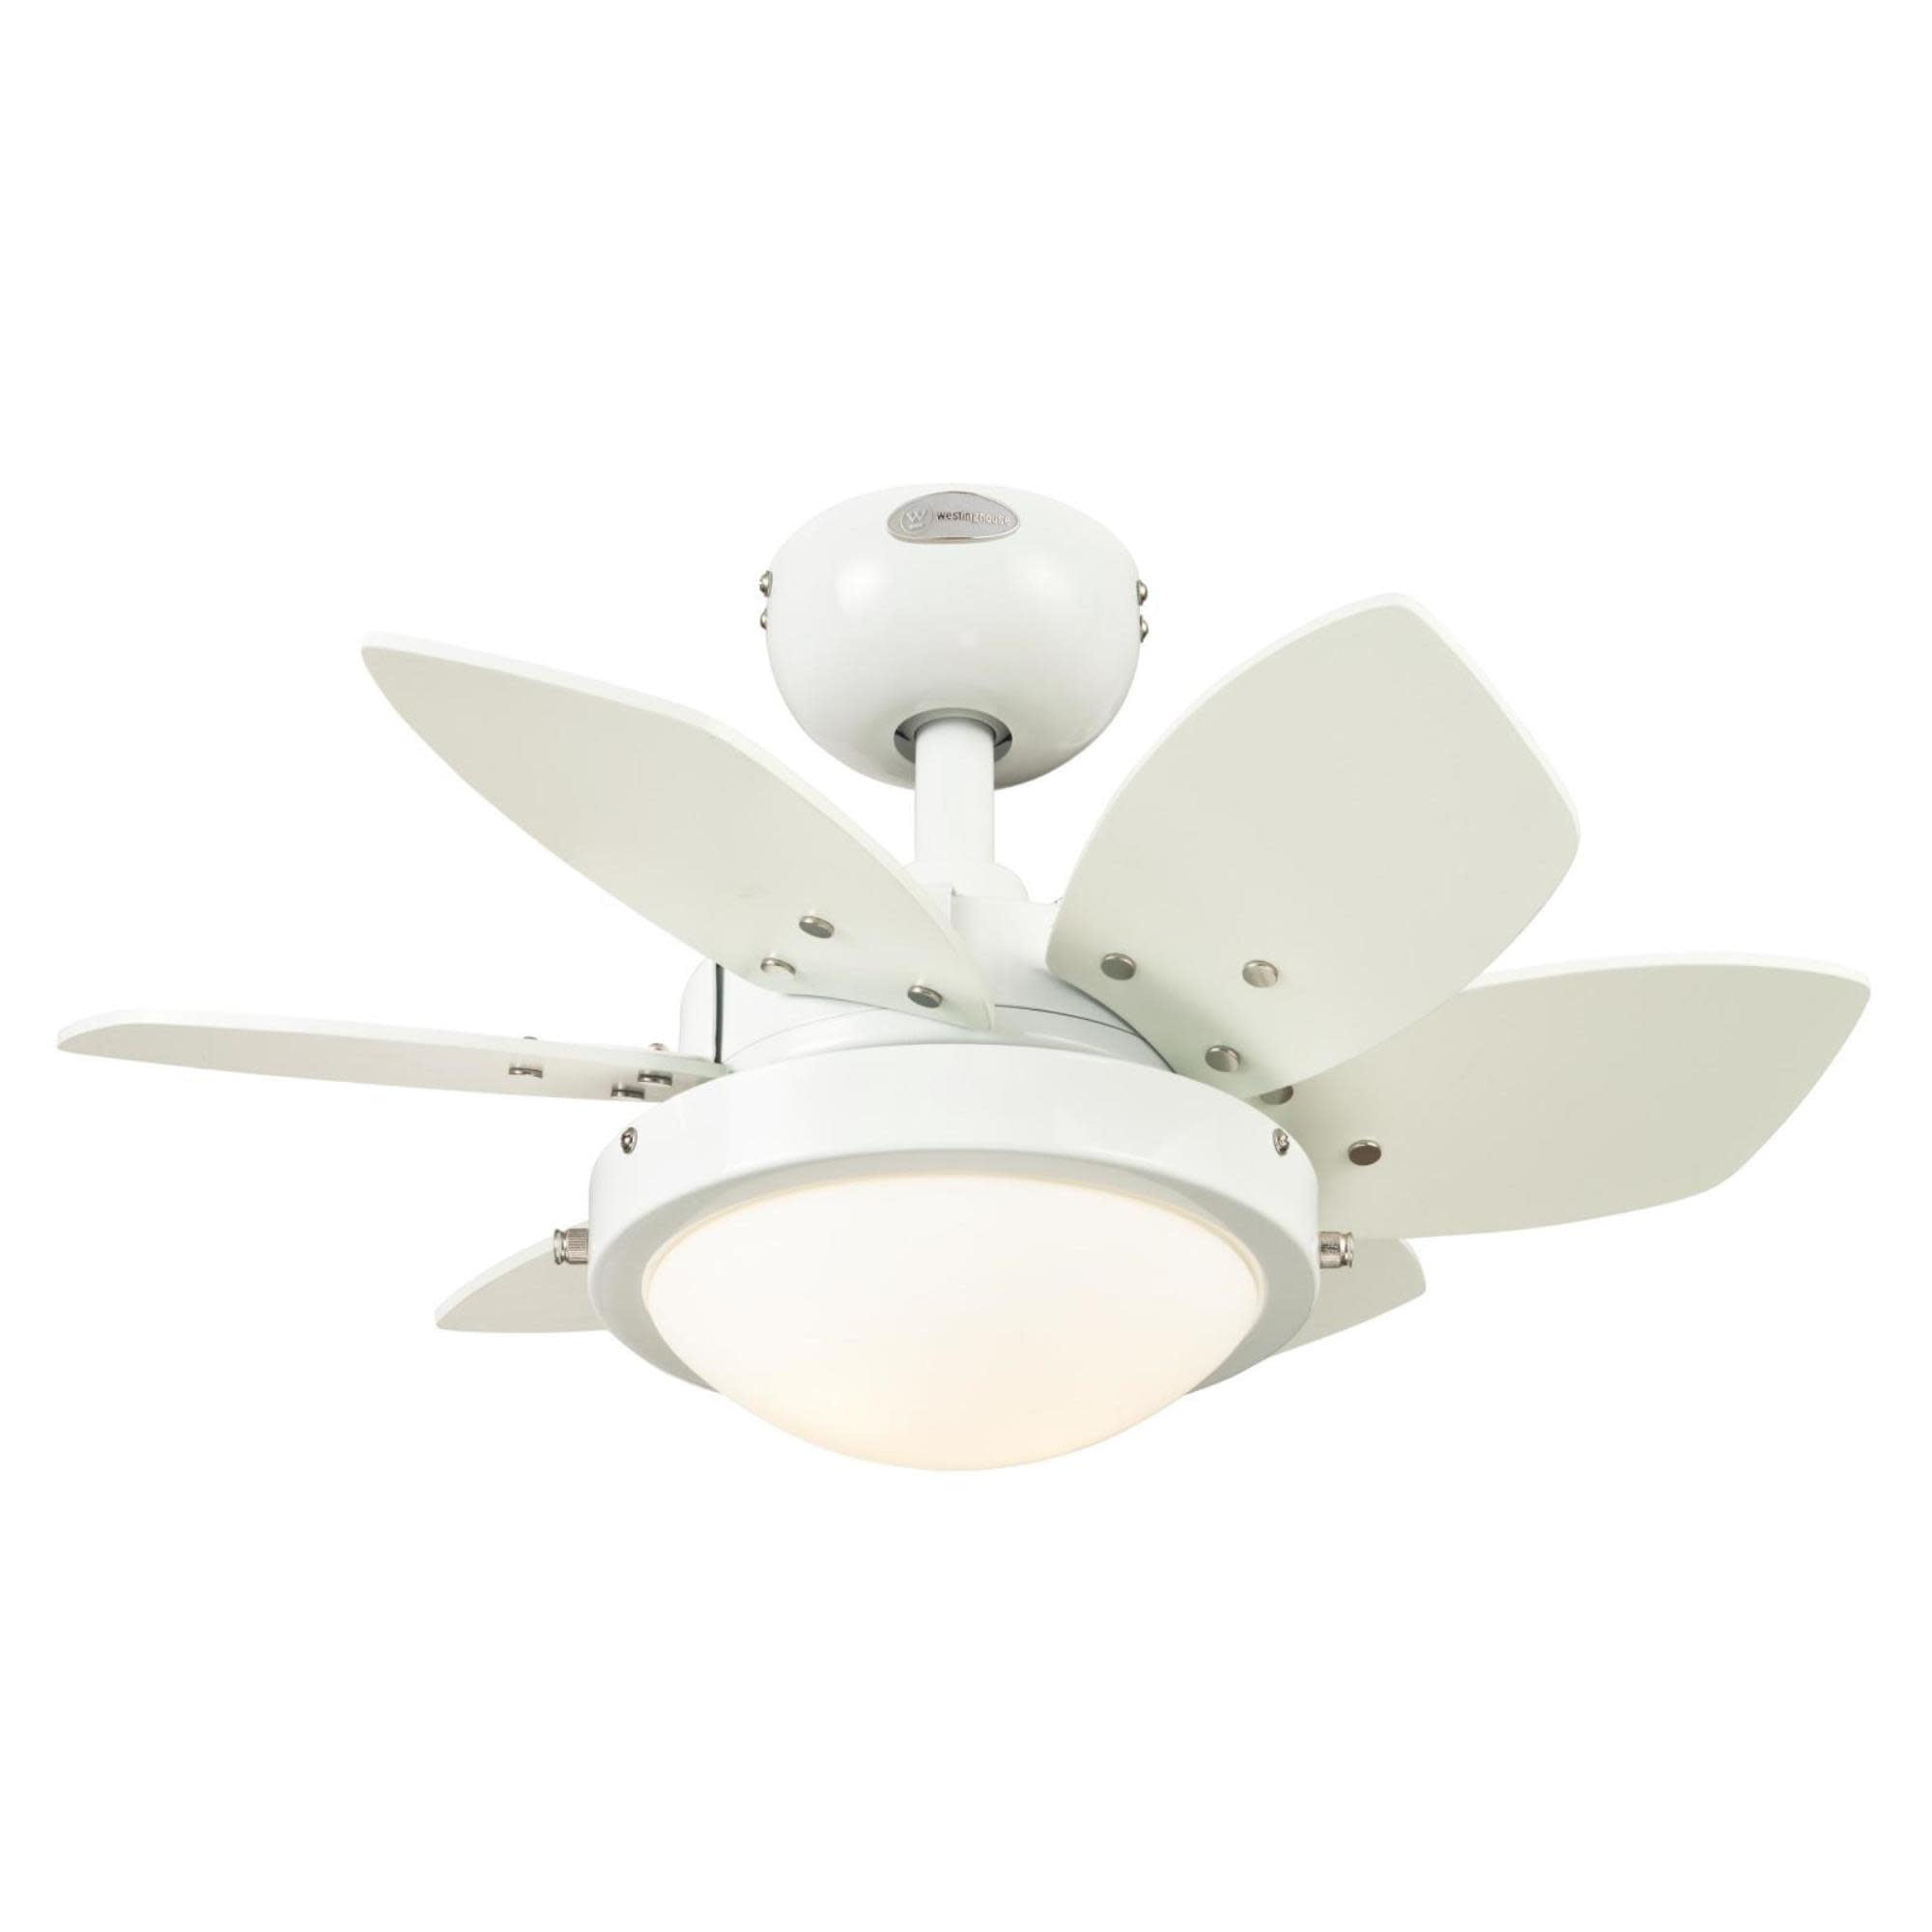 Quince 24-Inch Reversible Six-Blade Indoor Ceiling Fan WESTINGHOUSE 7224300 